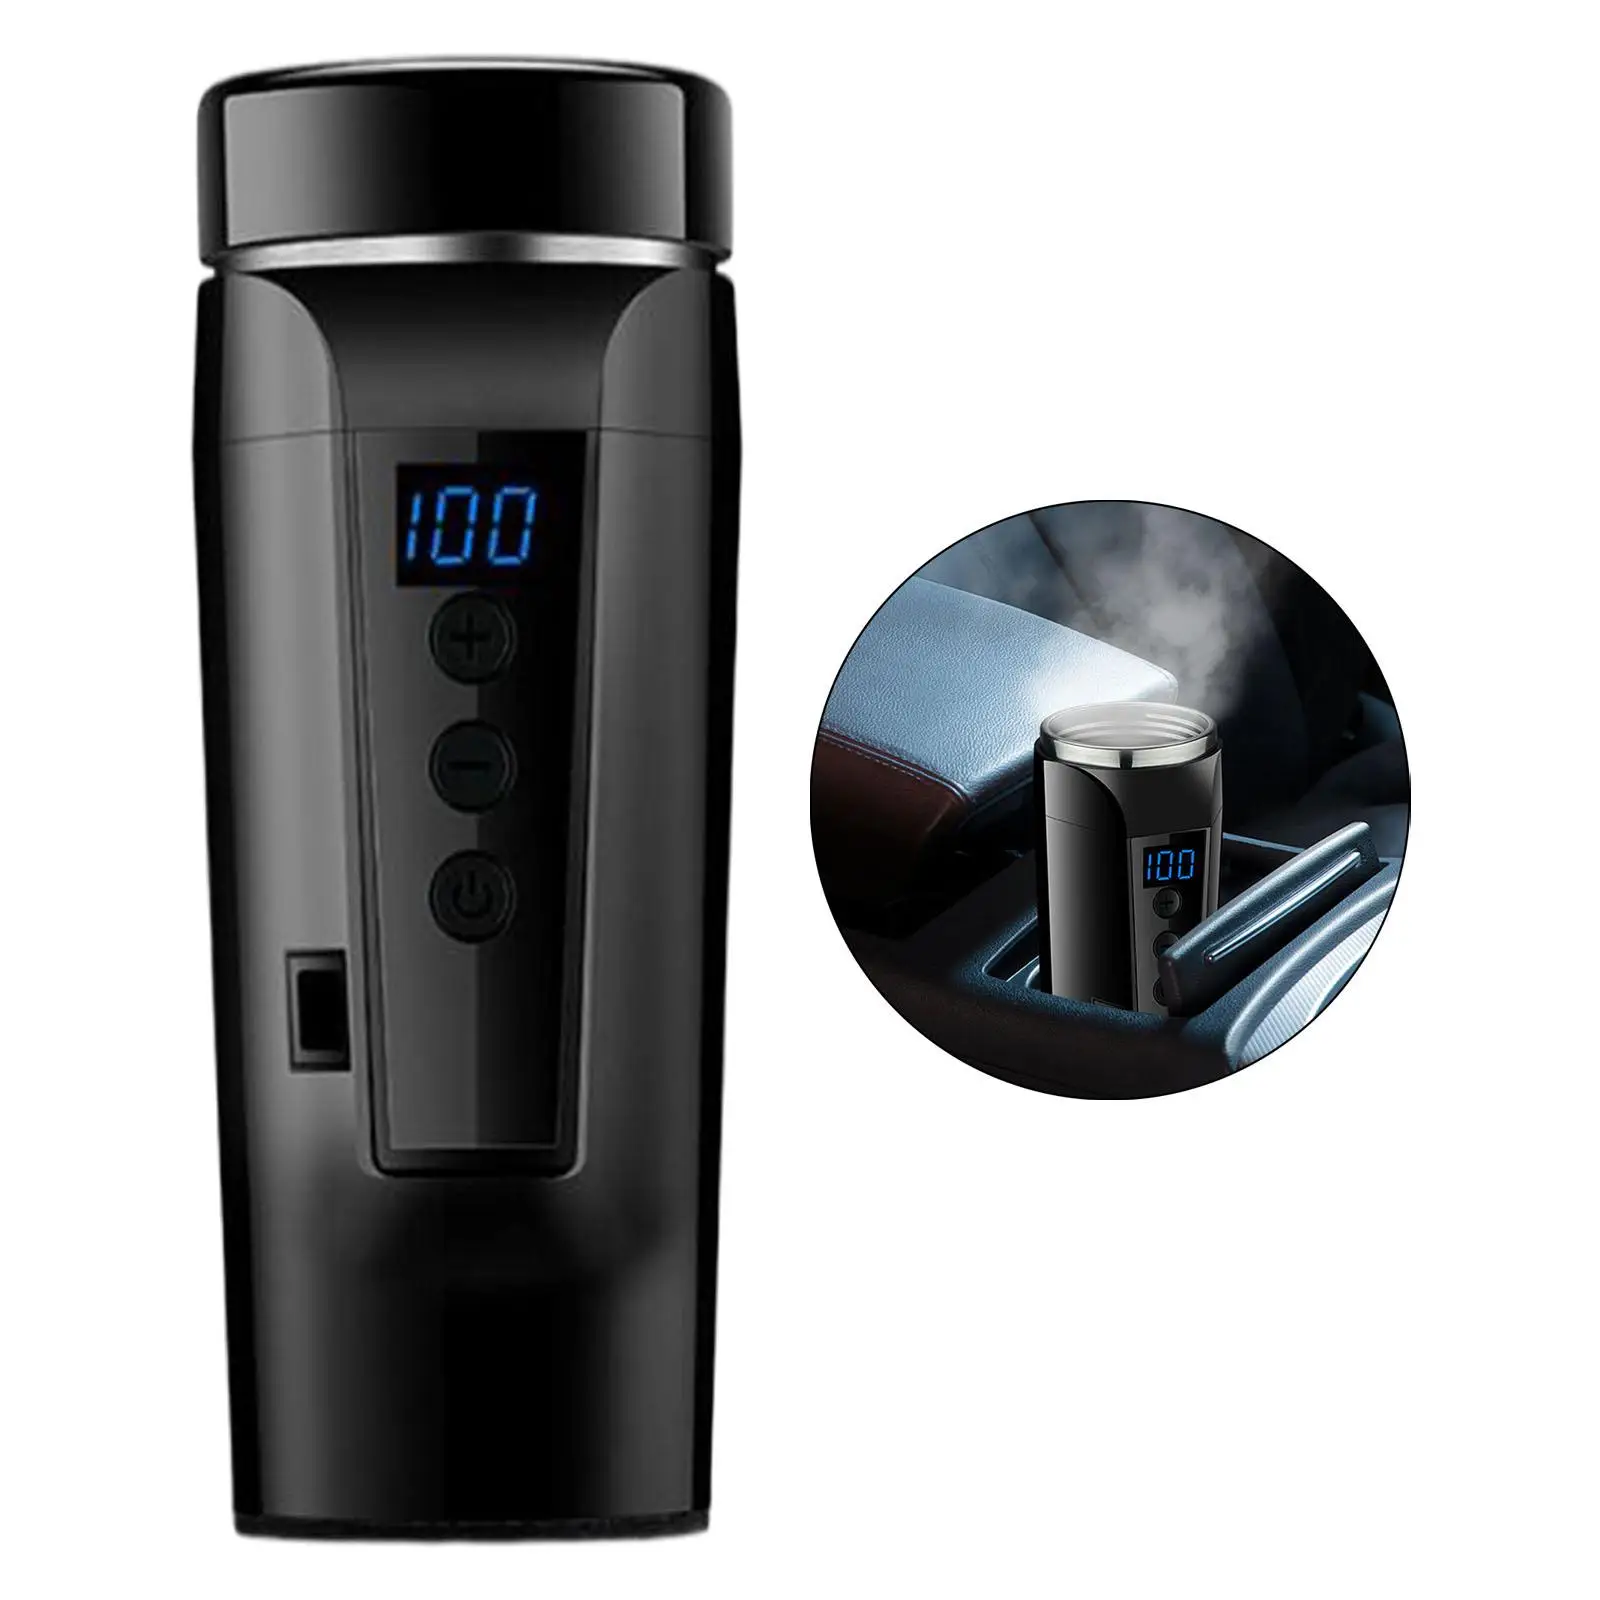 LED Display Car Kettle Boiler Coffee age 12V/24V Hot Water  Water Bottle Travel Mug Vacuum Insulated for Vehicles